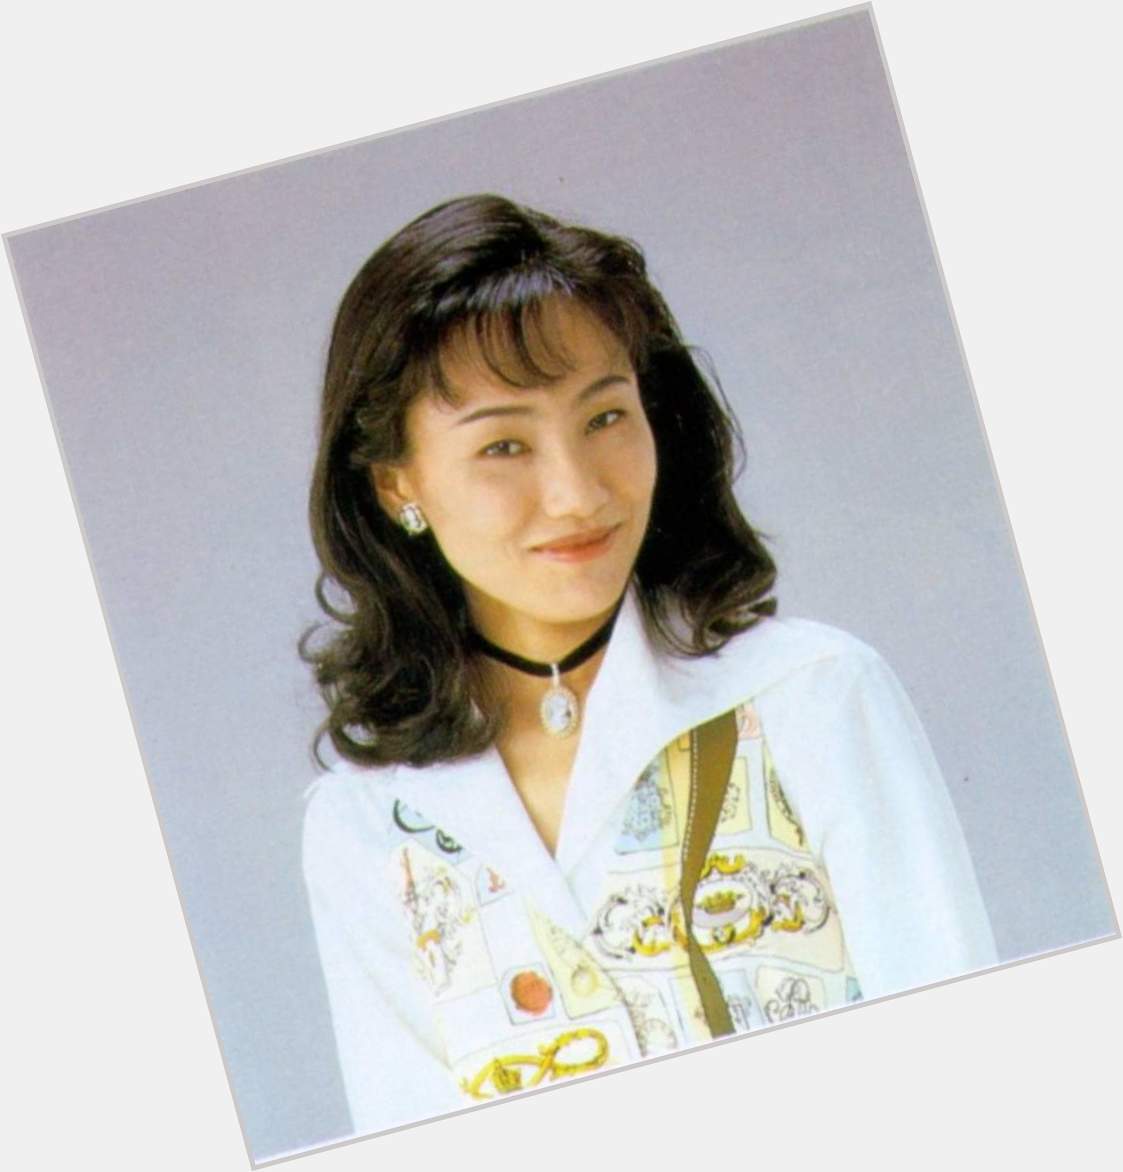 Big happy 52nd birthday shout out to Naoko Takeuchi! Creator of Sailor Moon and a big inspiration for many! 